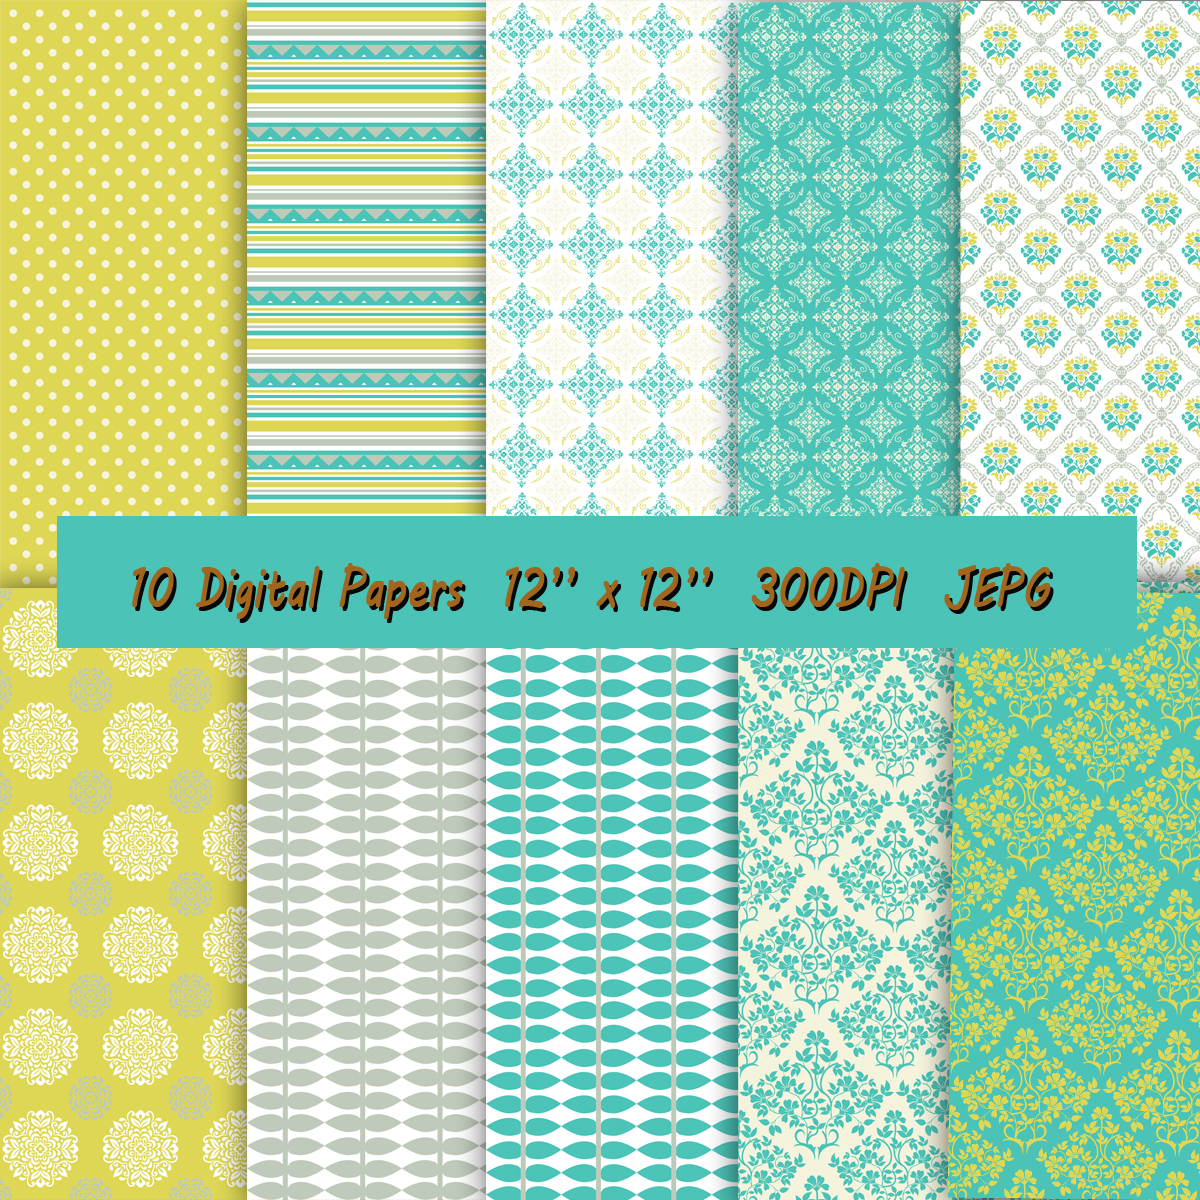 Digital Paper In Beautiful Combination Of Colors – Lime Green And Turquoise, White And Grey,florals And Leaves, Damask, Geometric And Dots